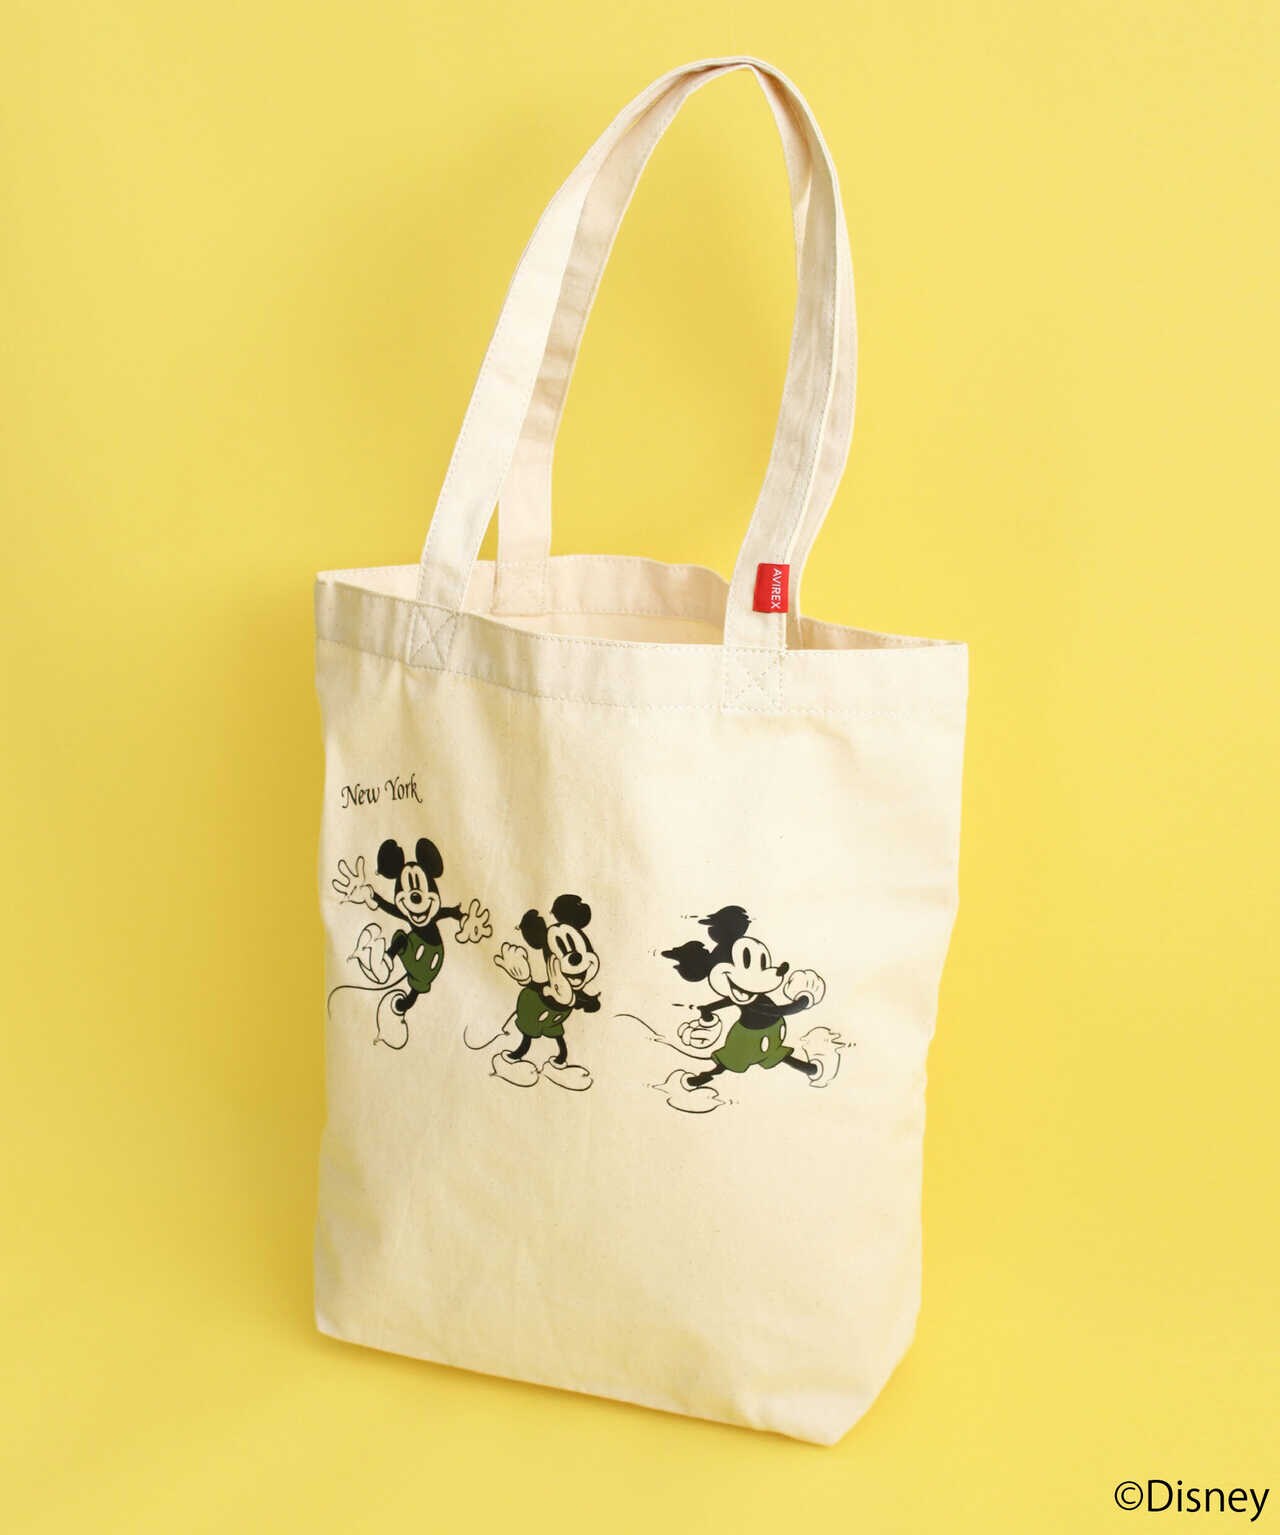 AVIREX/MICKEY MOUSE 333 TOTE BAG/ アヴィレックス/ミッキーマウス 333 トートバッグ